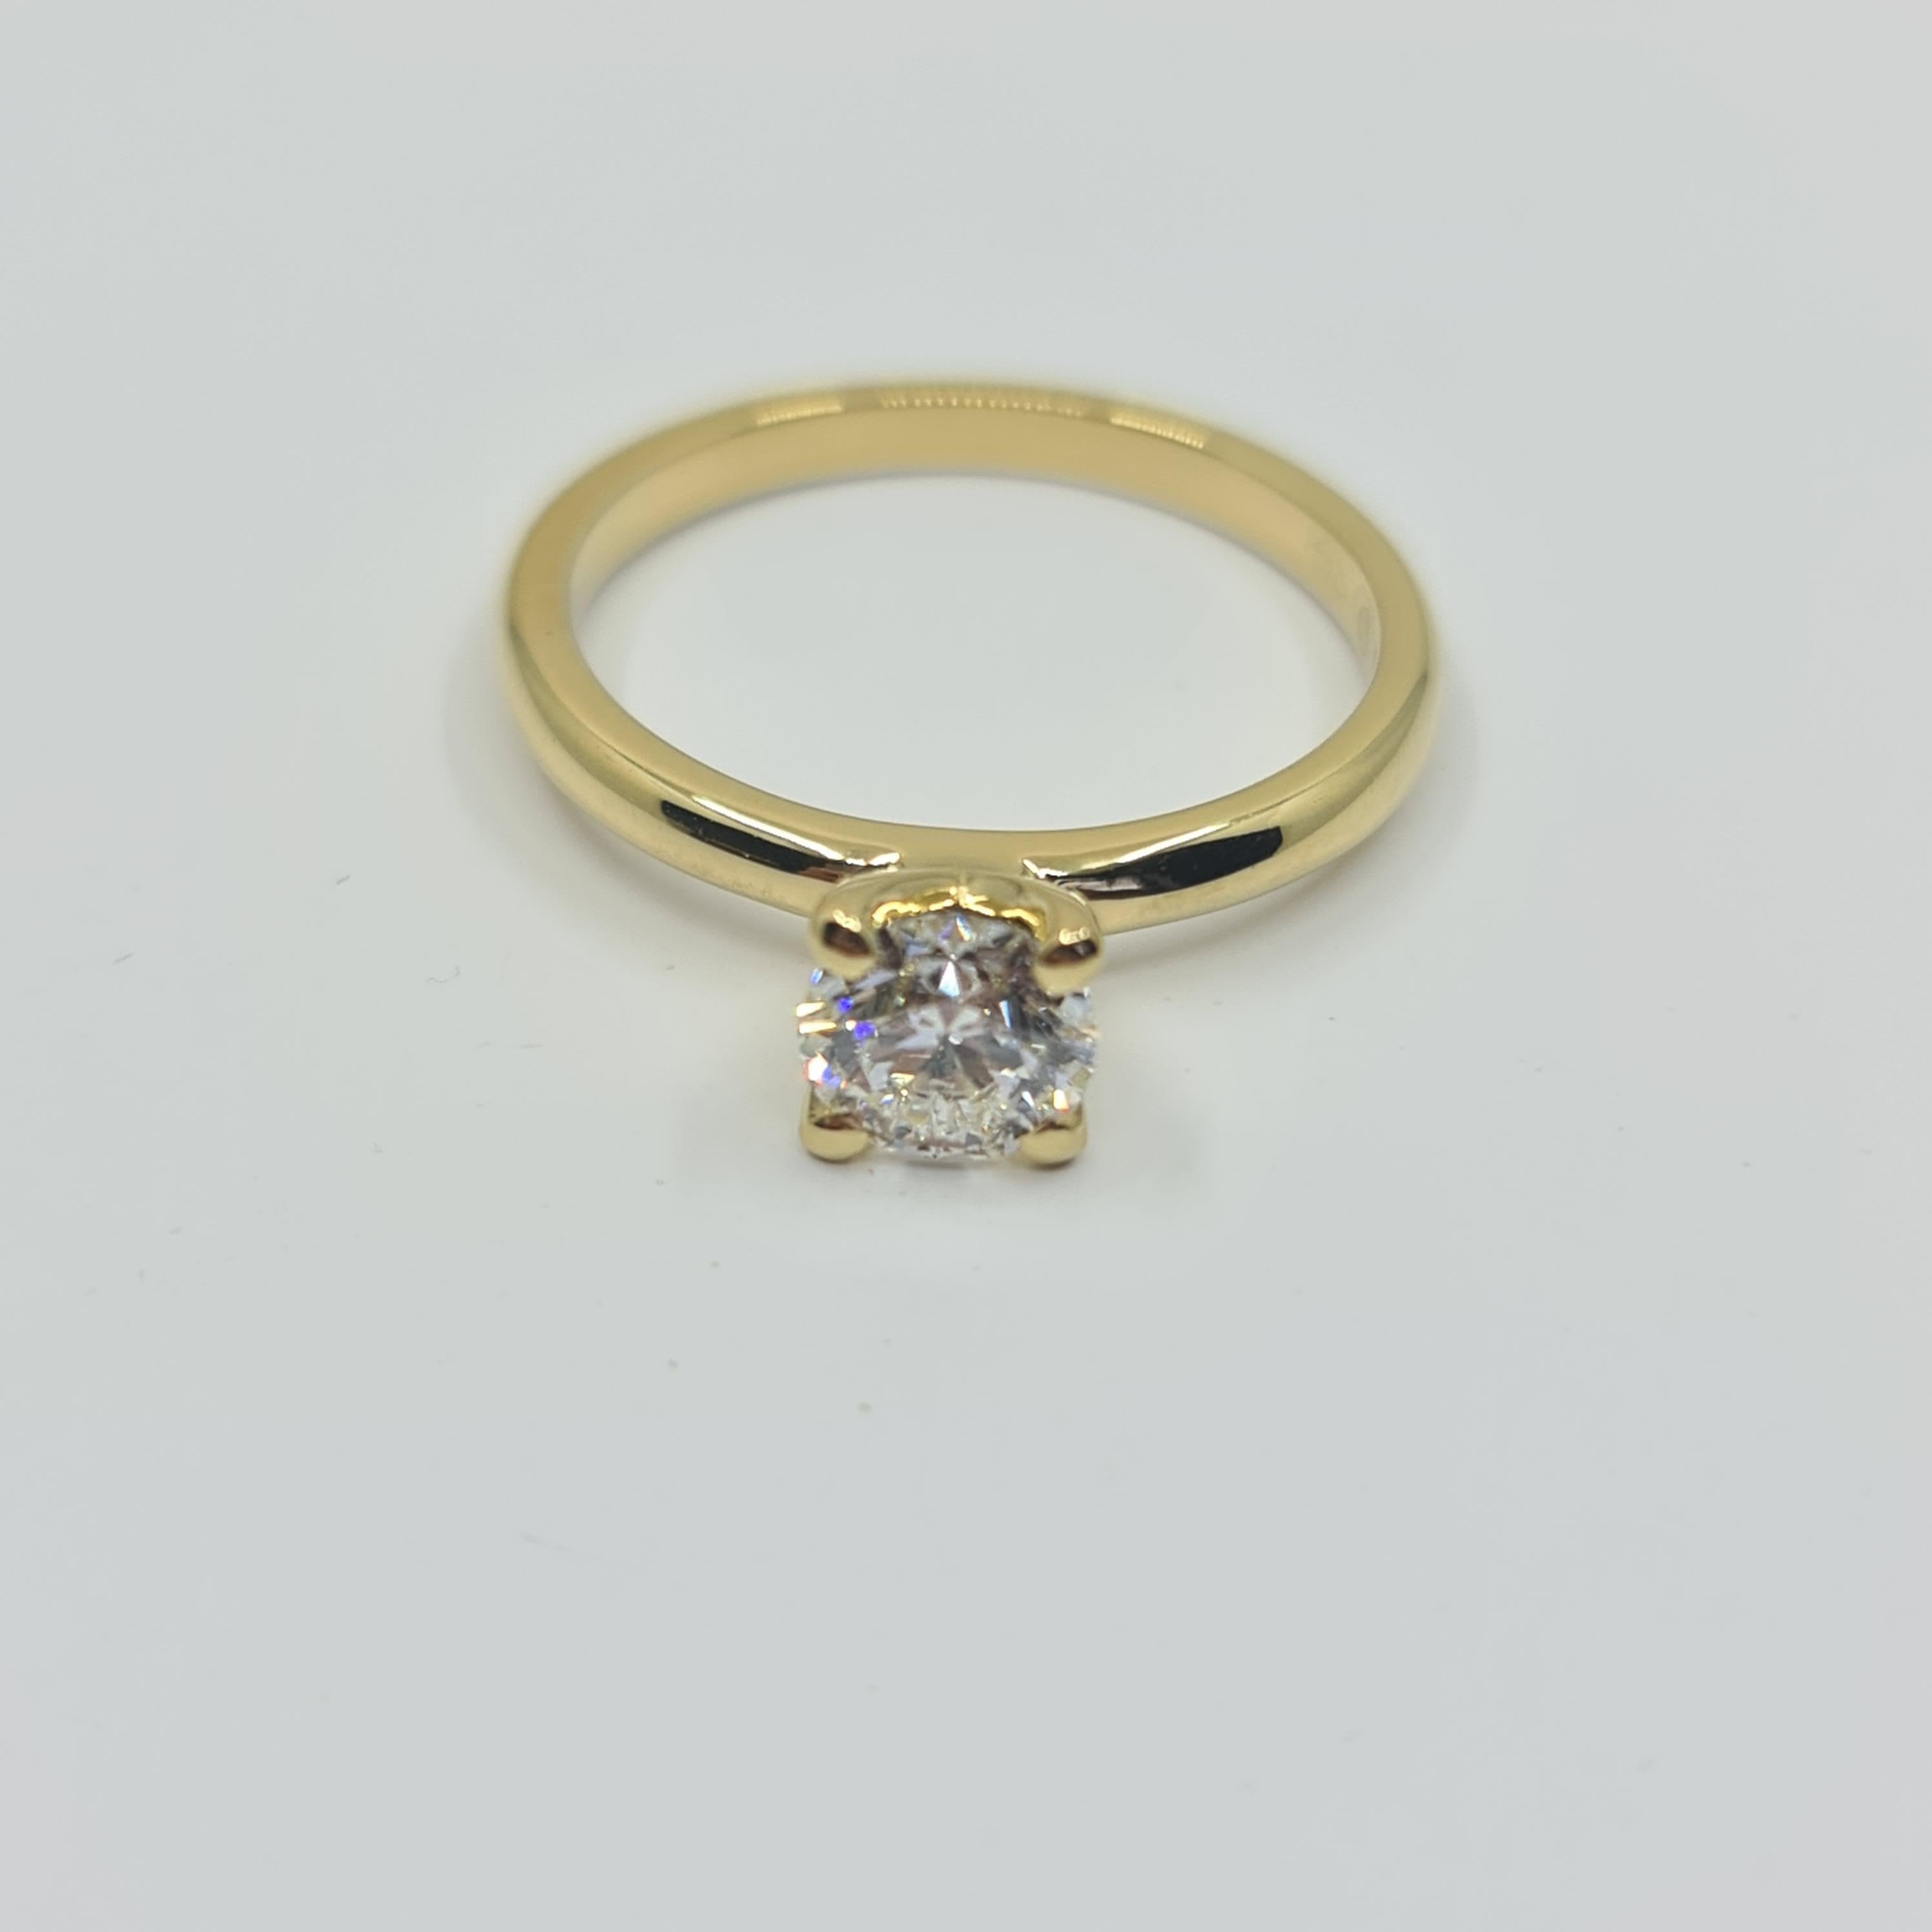 GIA Certified Diamond 1.00 Carat F/VVS1 Solitaire Ring in 4 Prong Setting For Sale 4